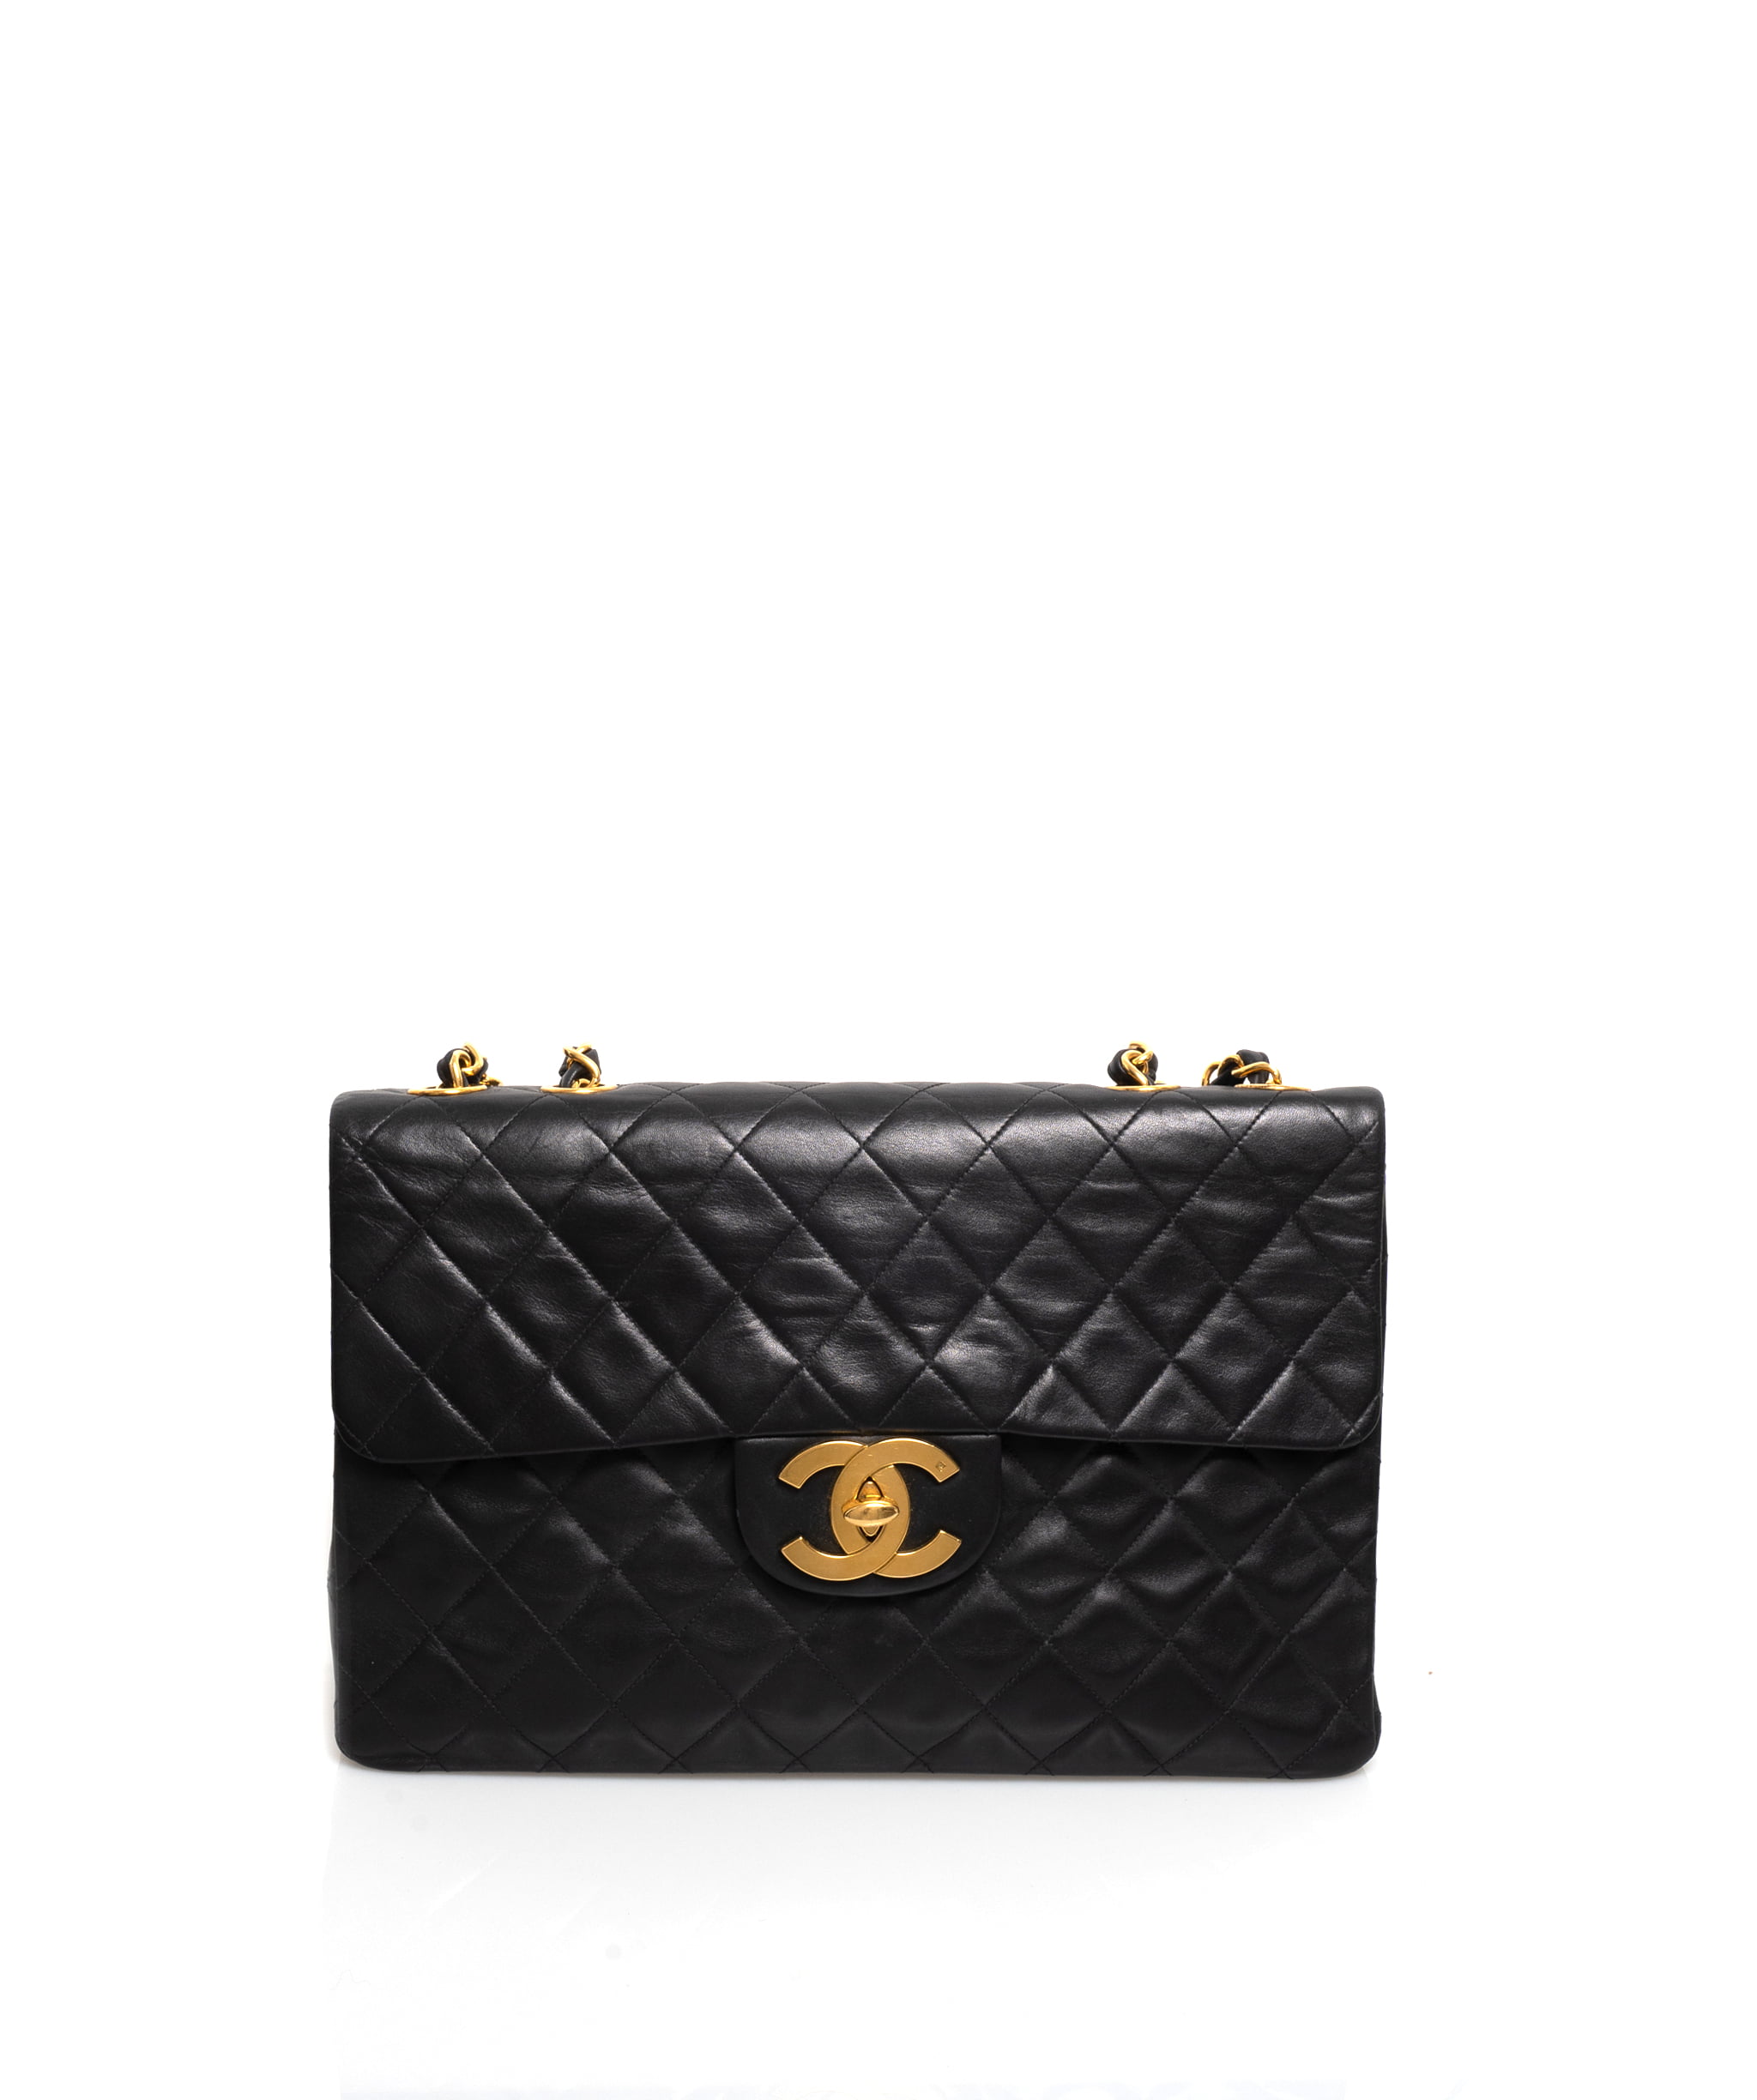 Chanel Black Vintage Patent Angled Classic Flap with Tassel Bag